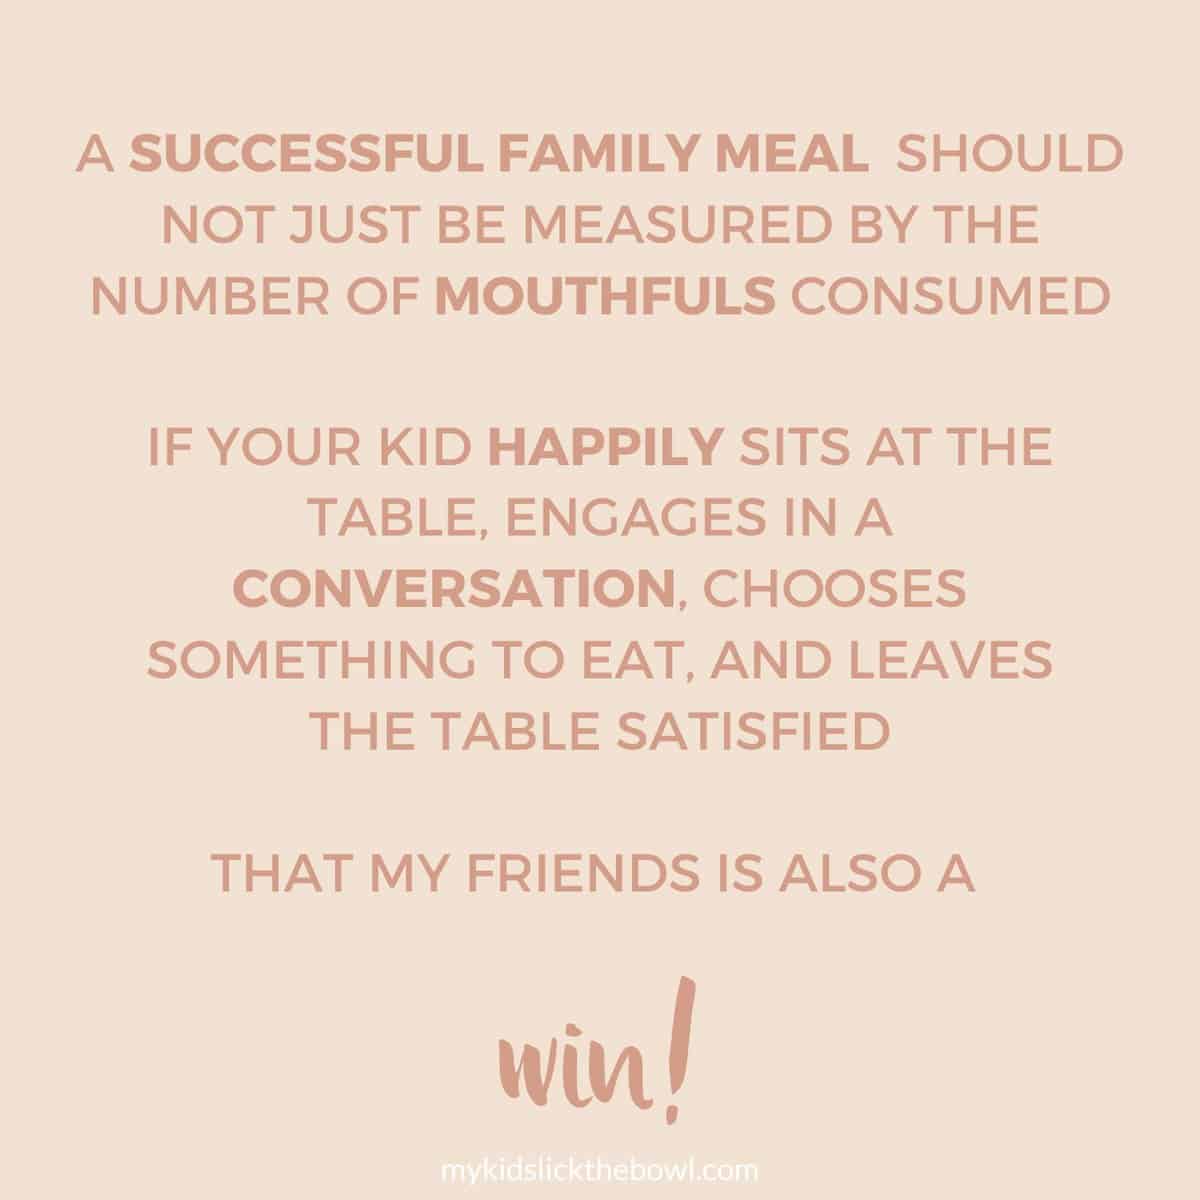 Meme: A successful family meal  should not just BE measured by the number of mouthfuls CONSUMED. If your kid happily sits at the table, engages in a conversation, chooses something to eat, and leaves the table satisfied
That my friends is also a win!